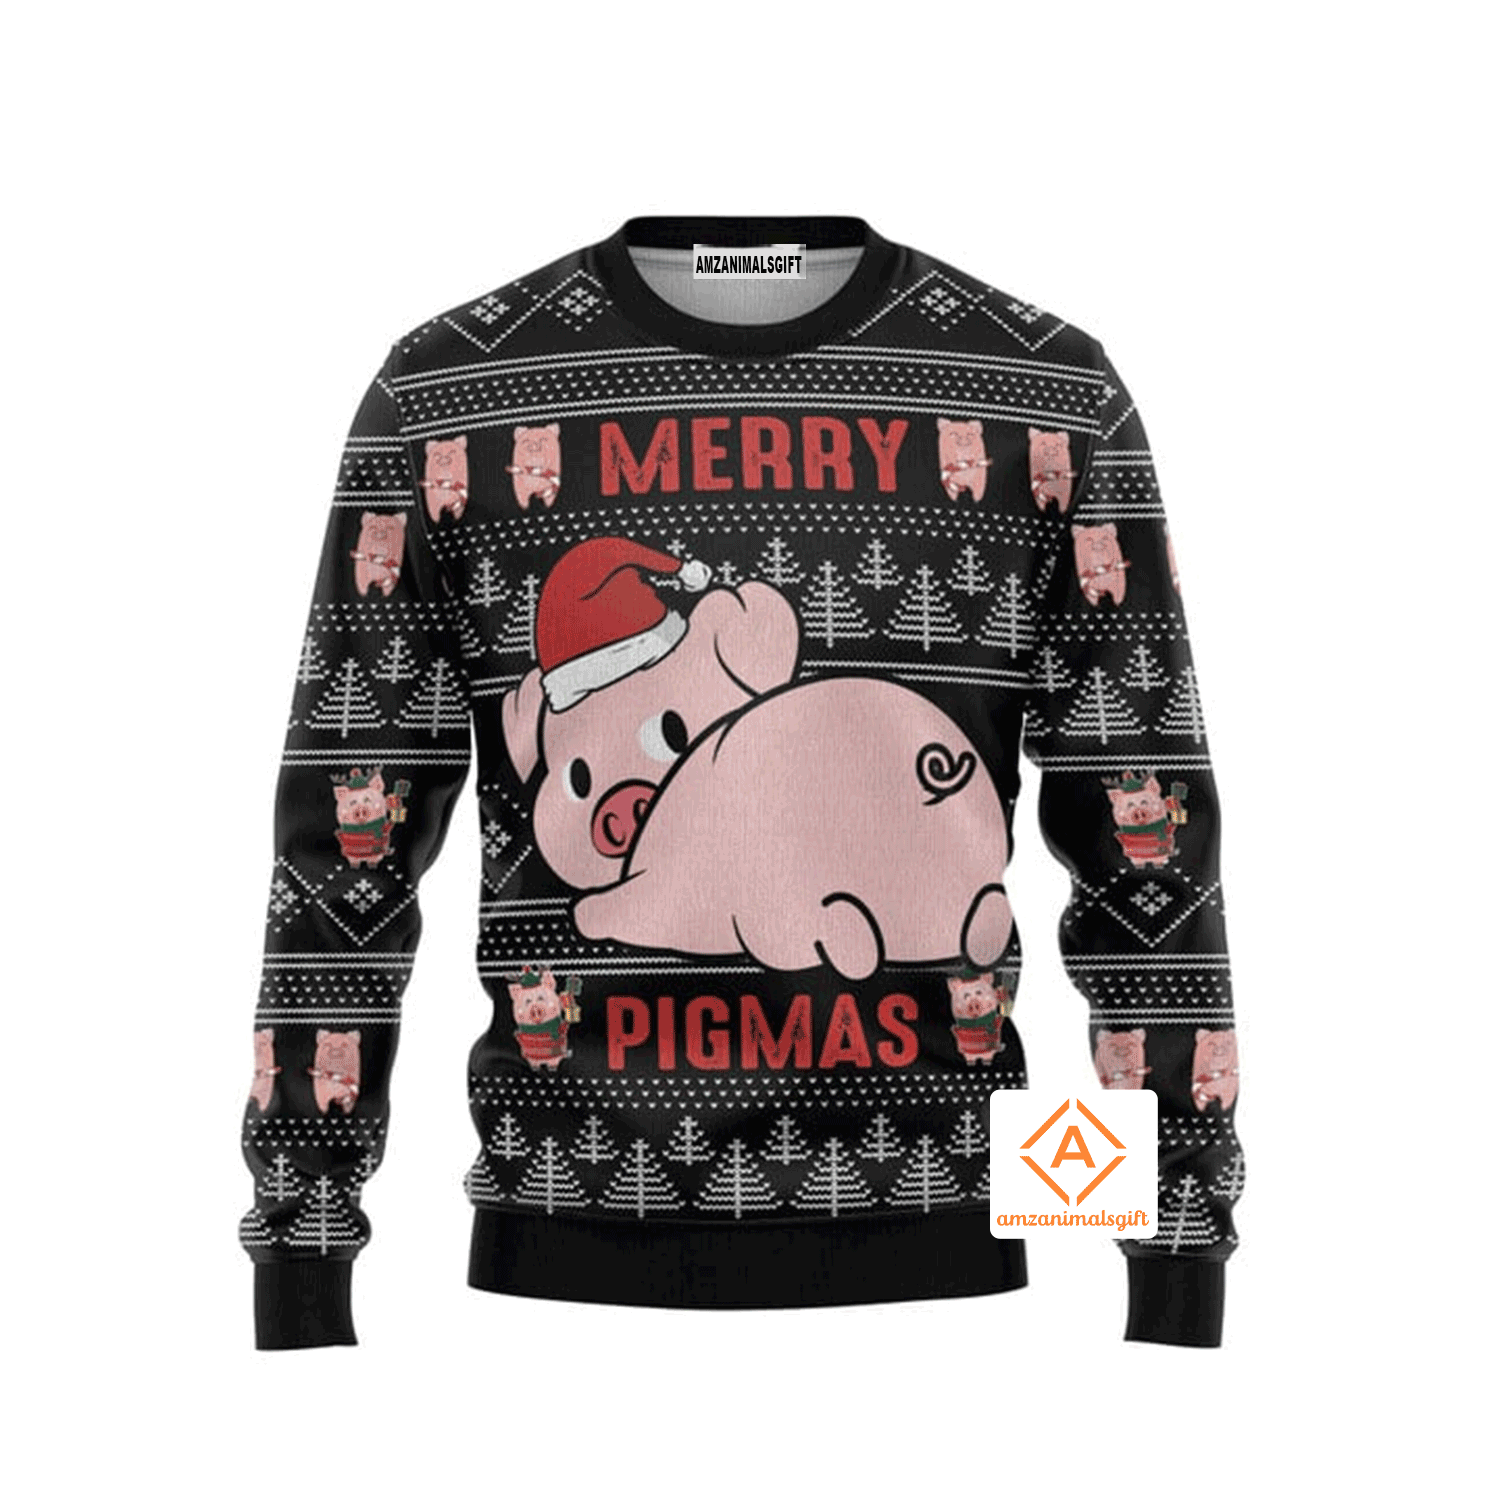 Merry Pigmas Christmas Sweater, Ugly Sweater For Men & Women, Perfect Outfit For Christmas New Year Autumn Winter